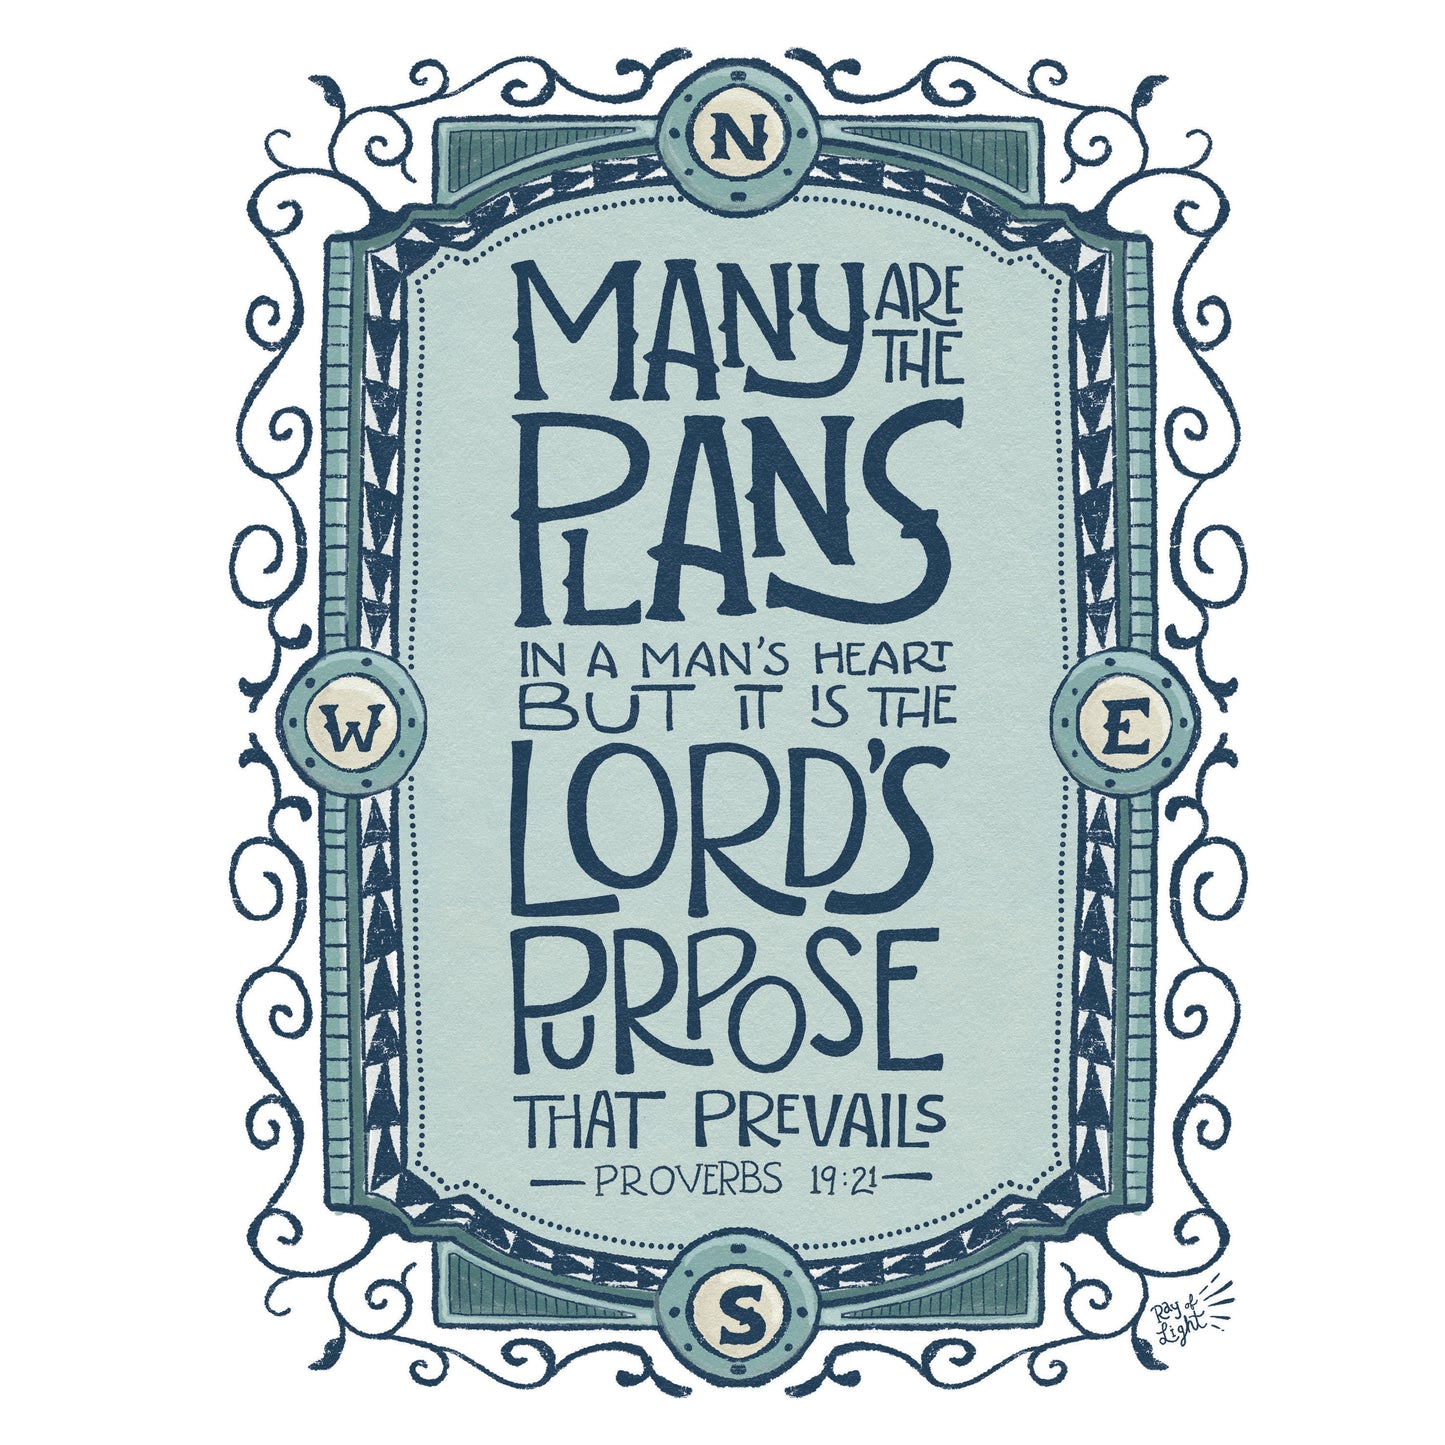 Proverbs 19:21 - Many are the Plans